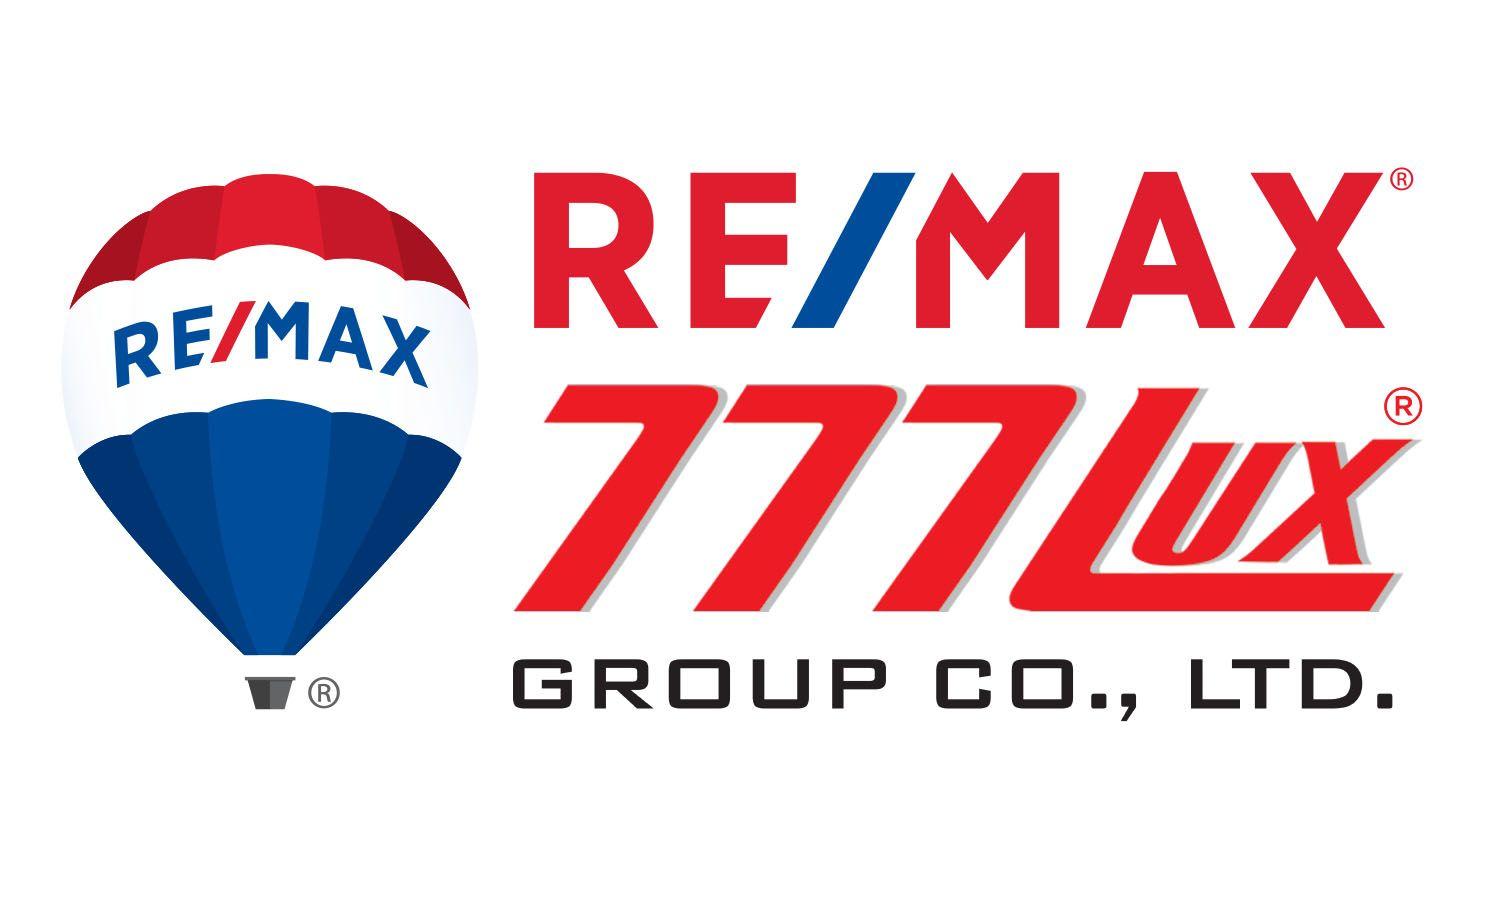 Remax.com Logo - Our Offices – Remax Myanmar